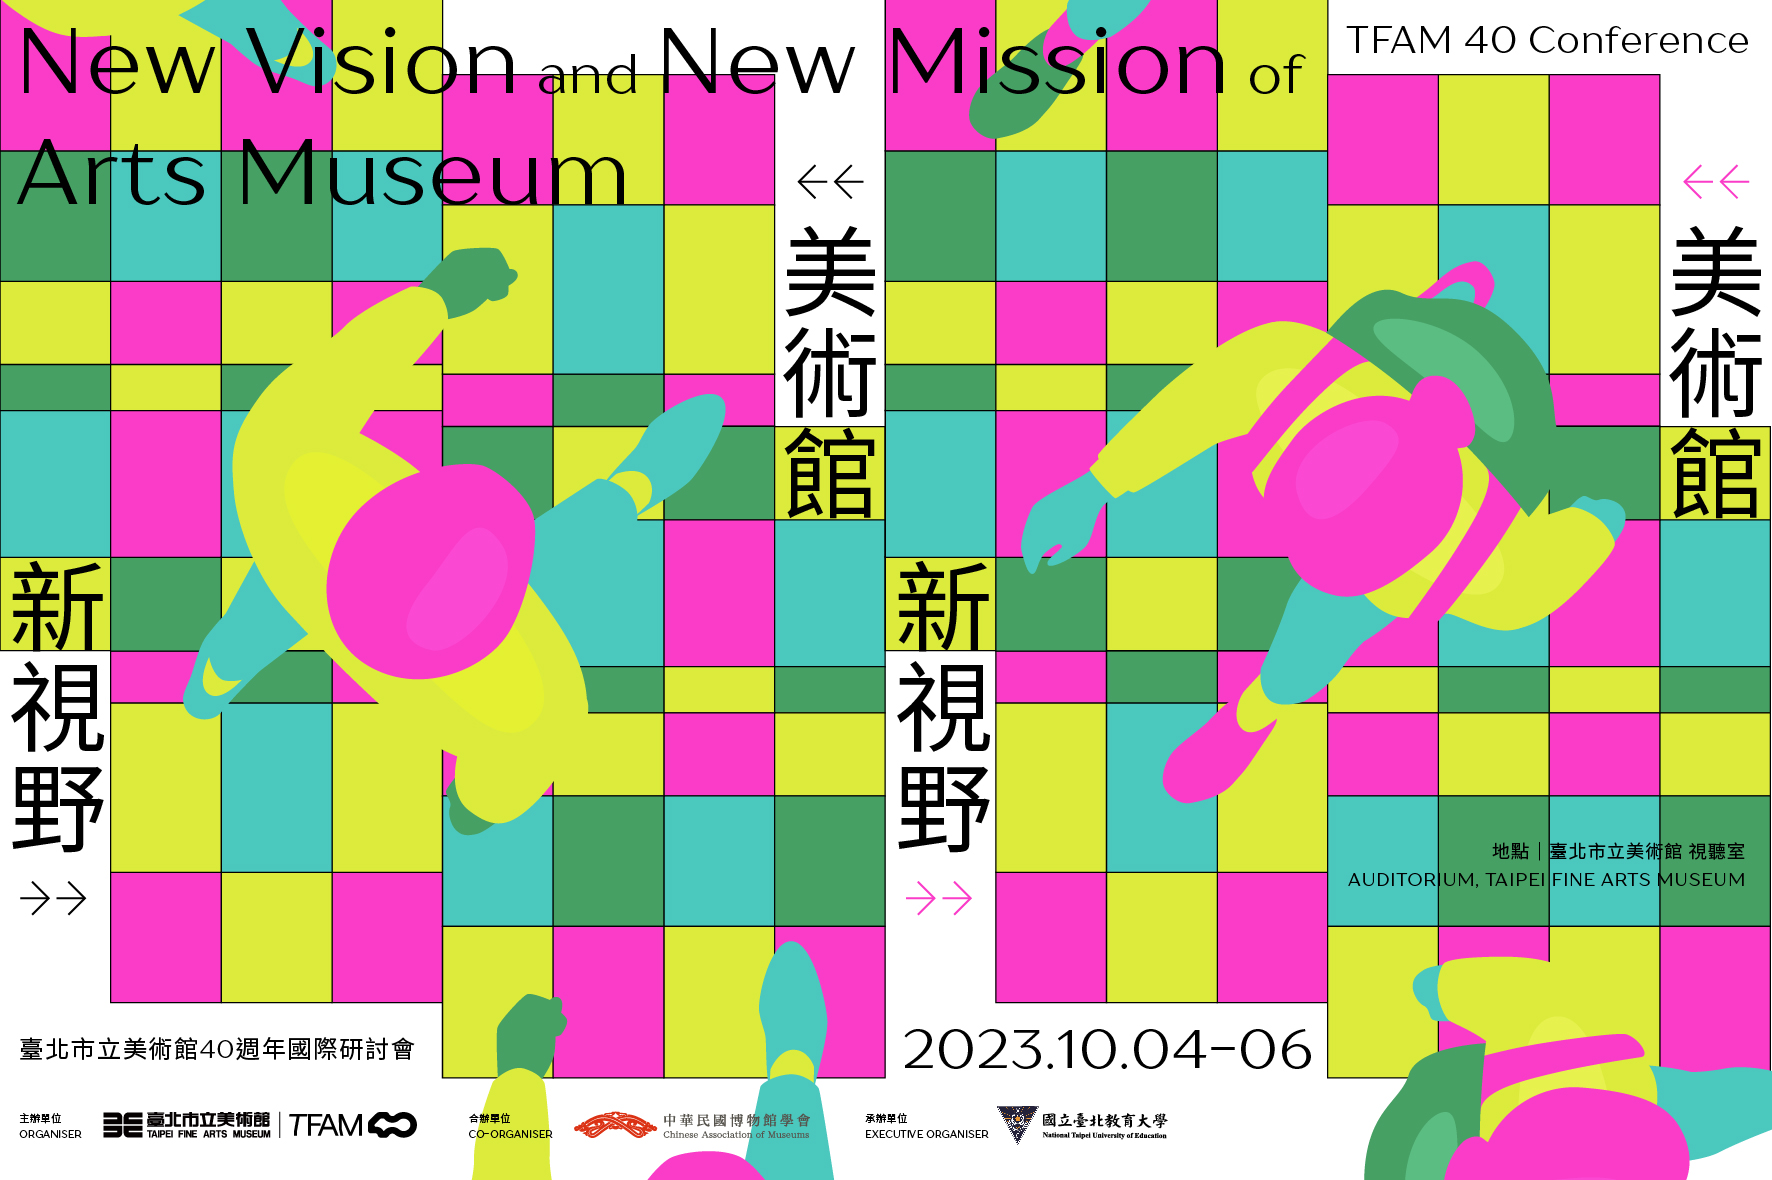 TFAM 40 Conference: New Vision and New Mission of Arts Museum - photos